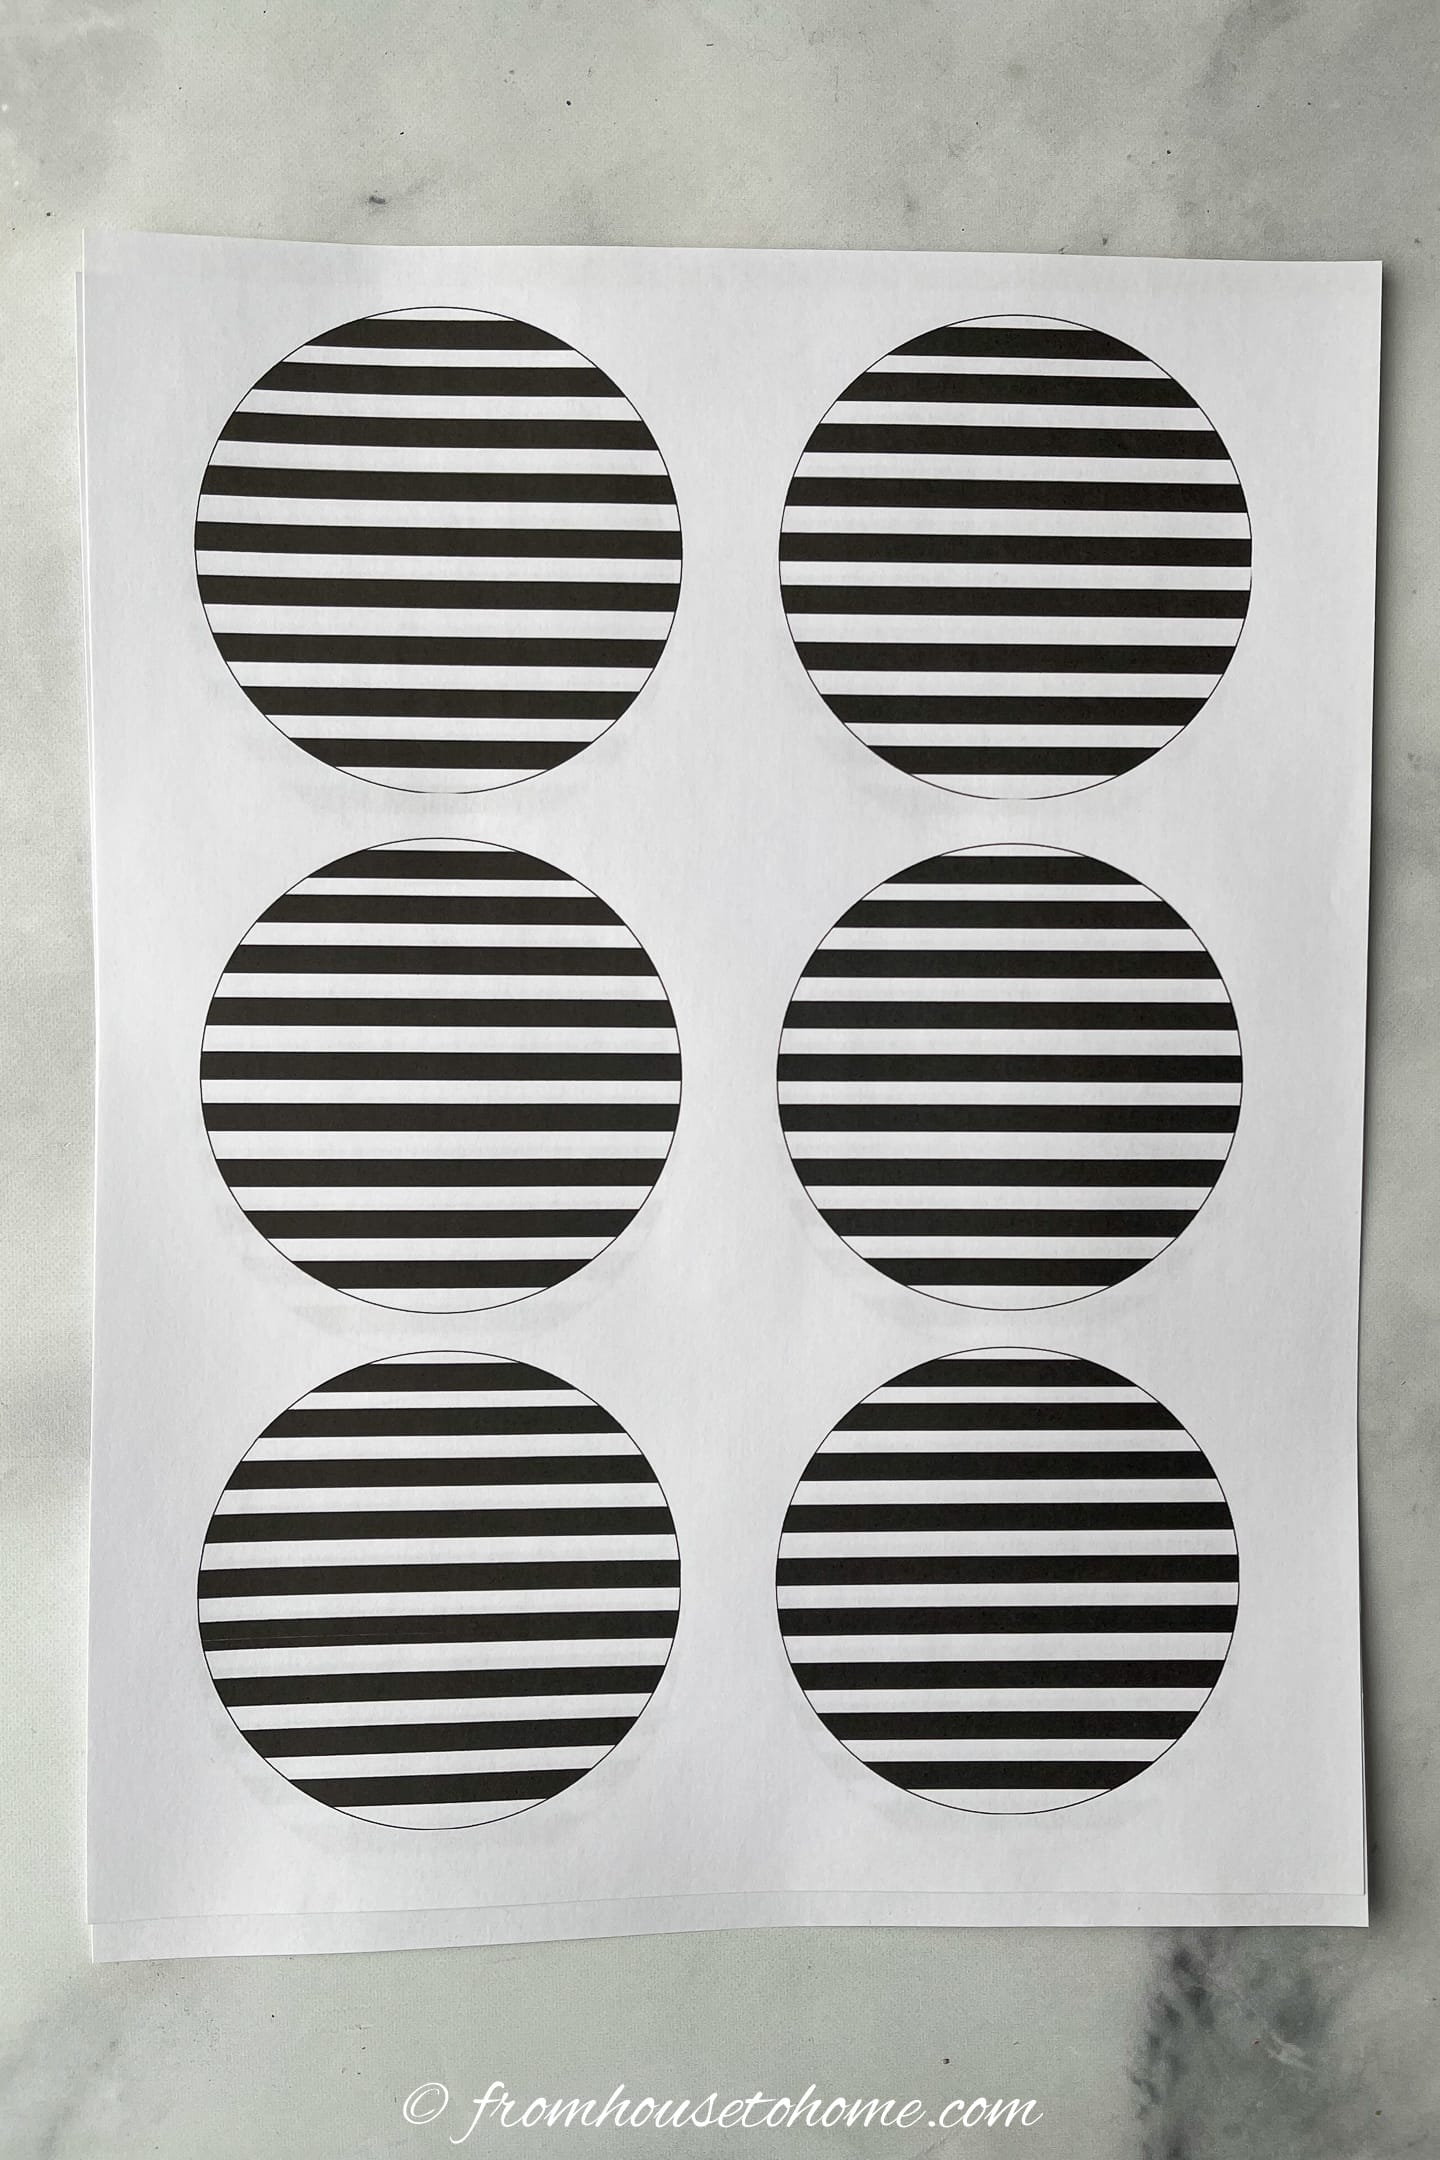 Black and white striped circles printed on a piece of paper